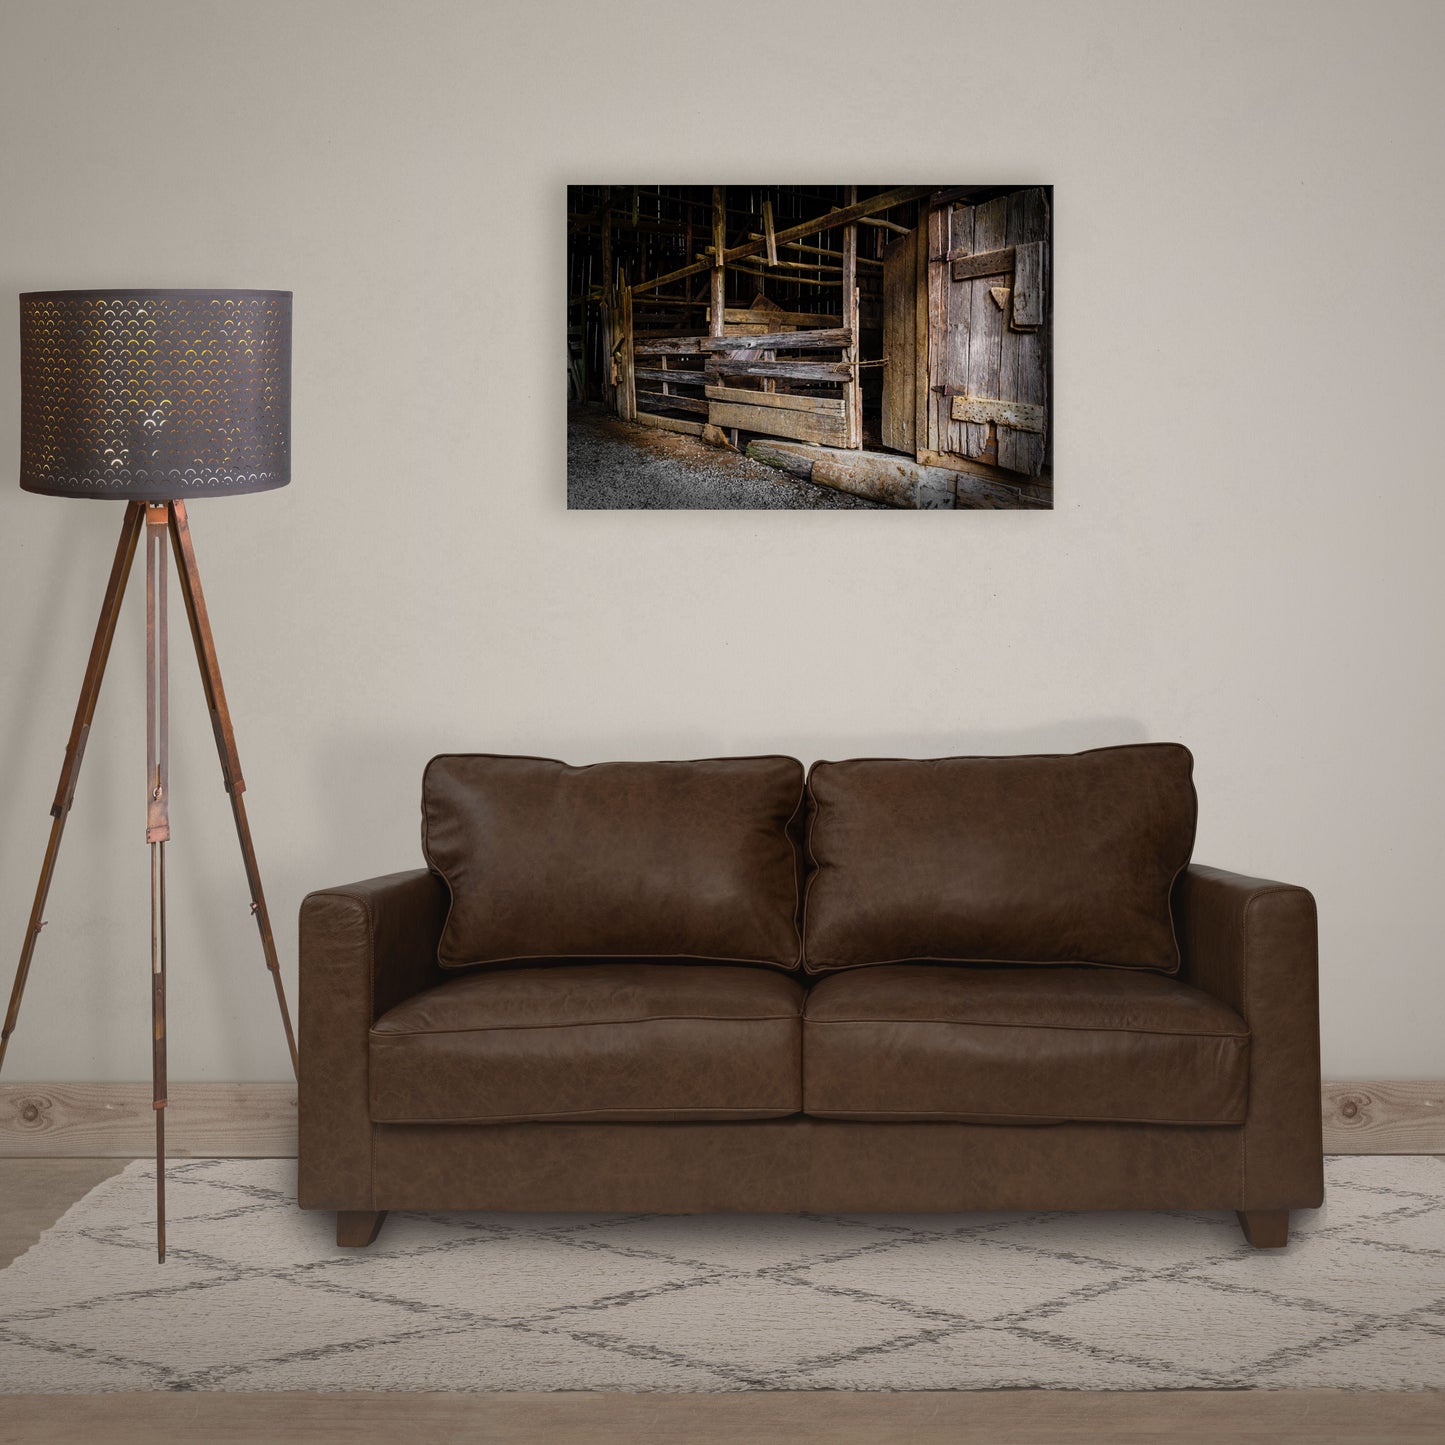 rustic wall decor featuring a dark and moody canvas of the inside of an old barn